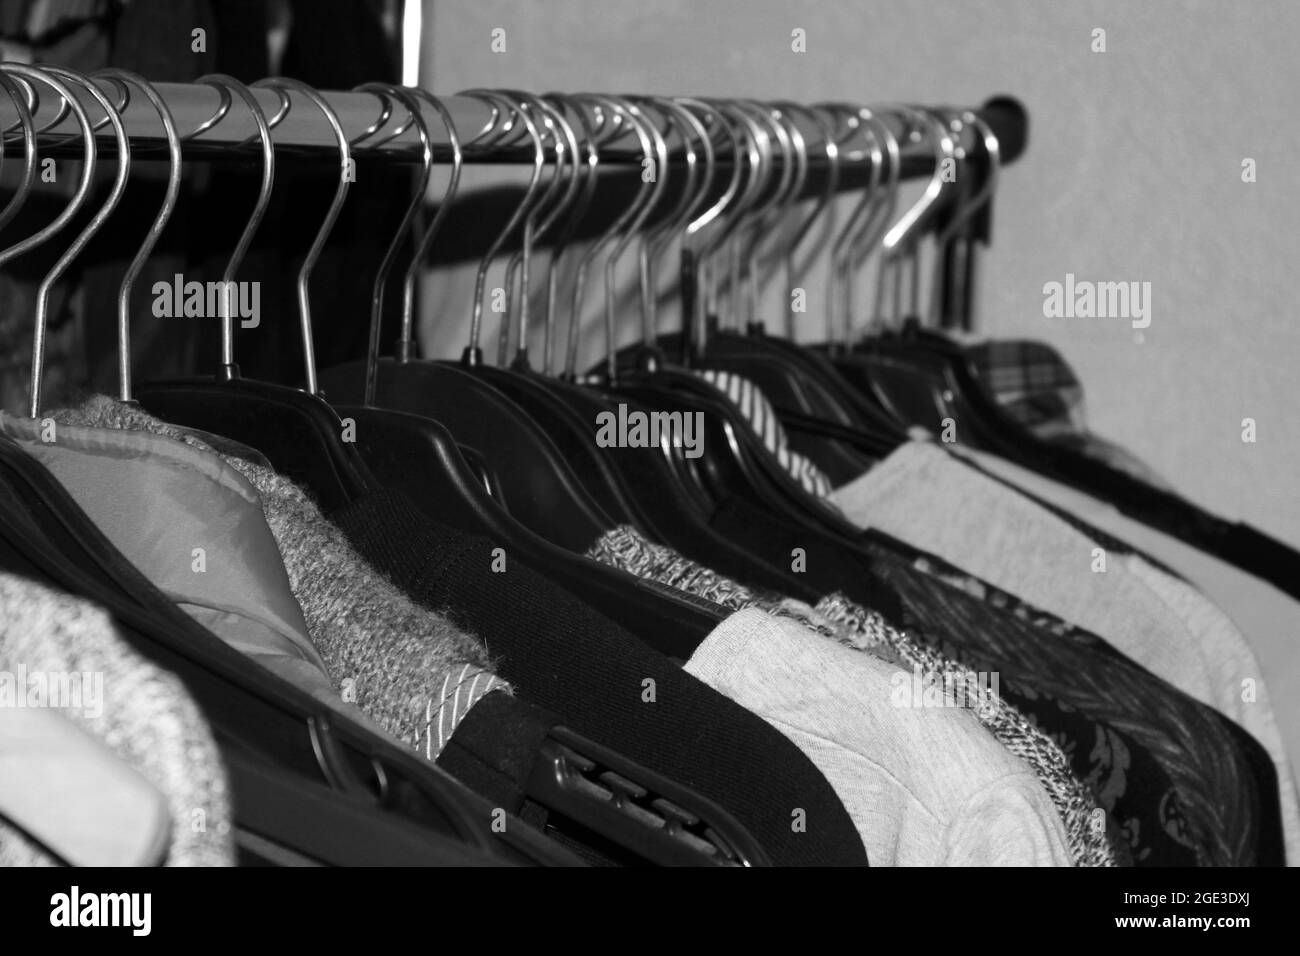 Clothes on a hanger. Black and white photo Stock Photo